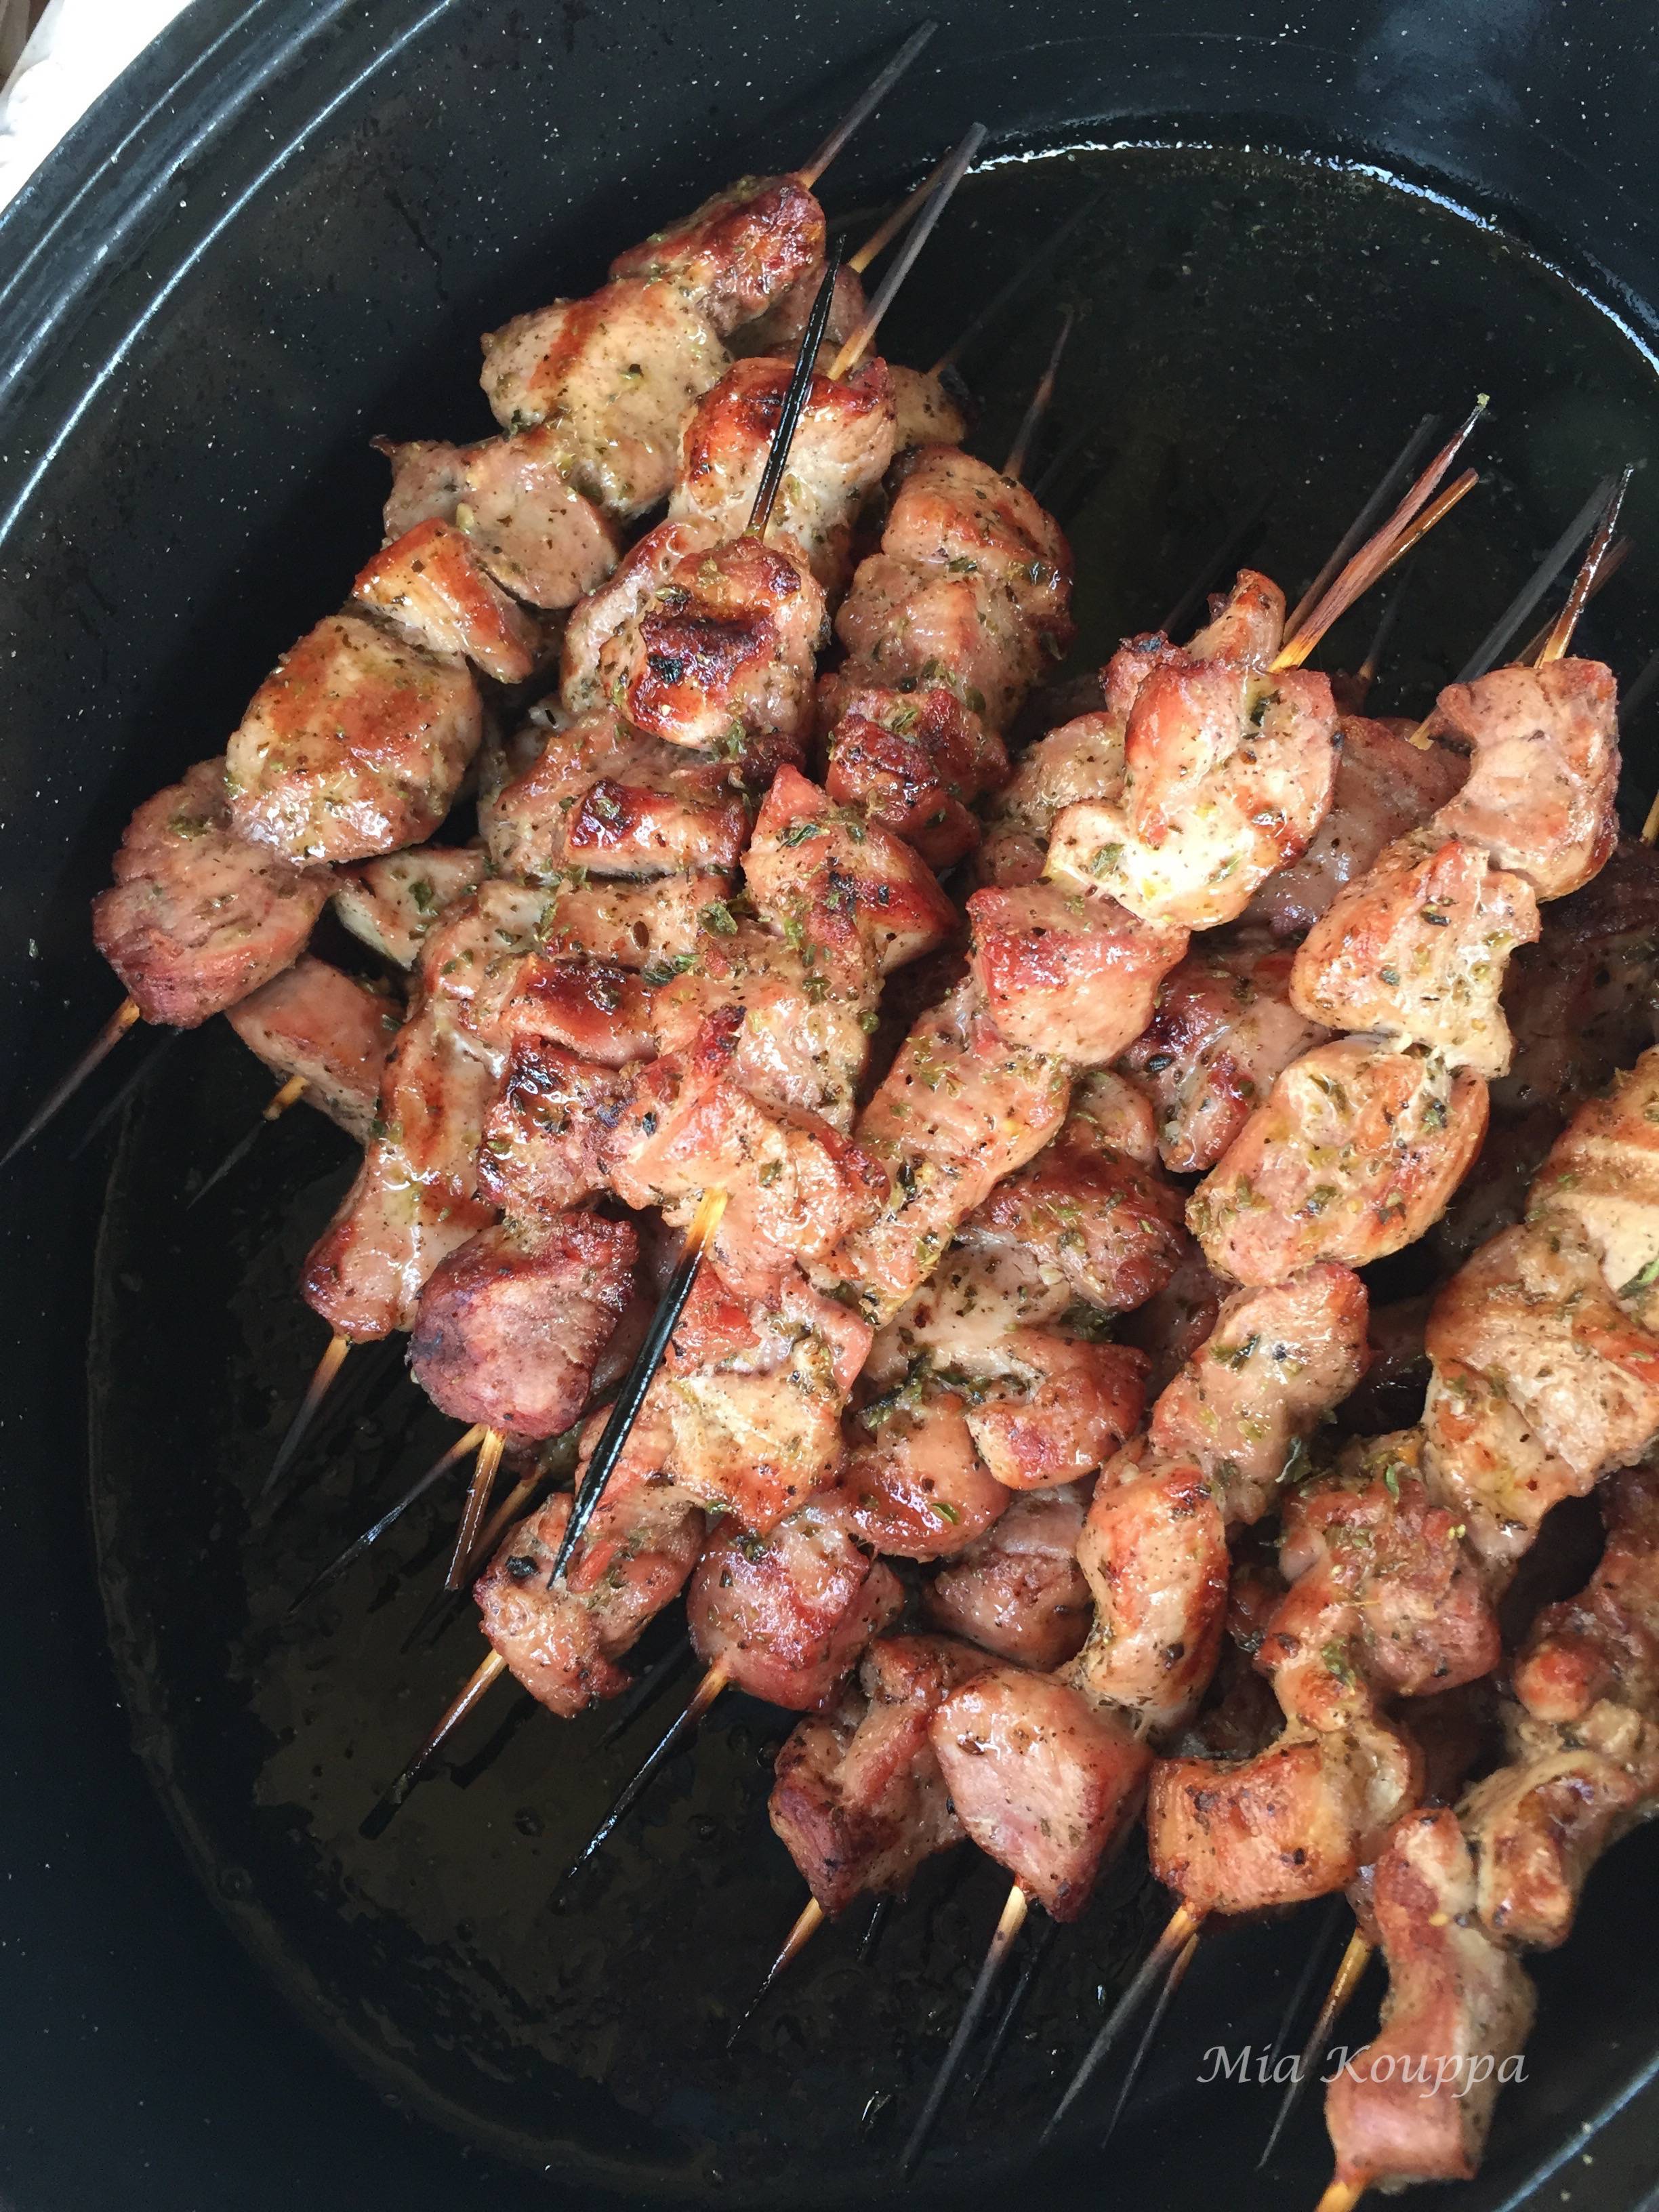 Grilled Pork souvlaki recipe. Marinated overnight, and deliciously flavourful and tender